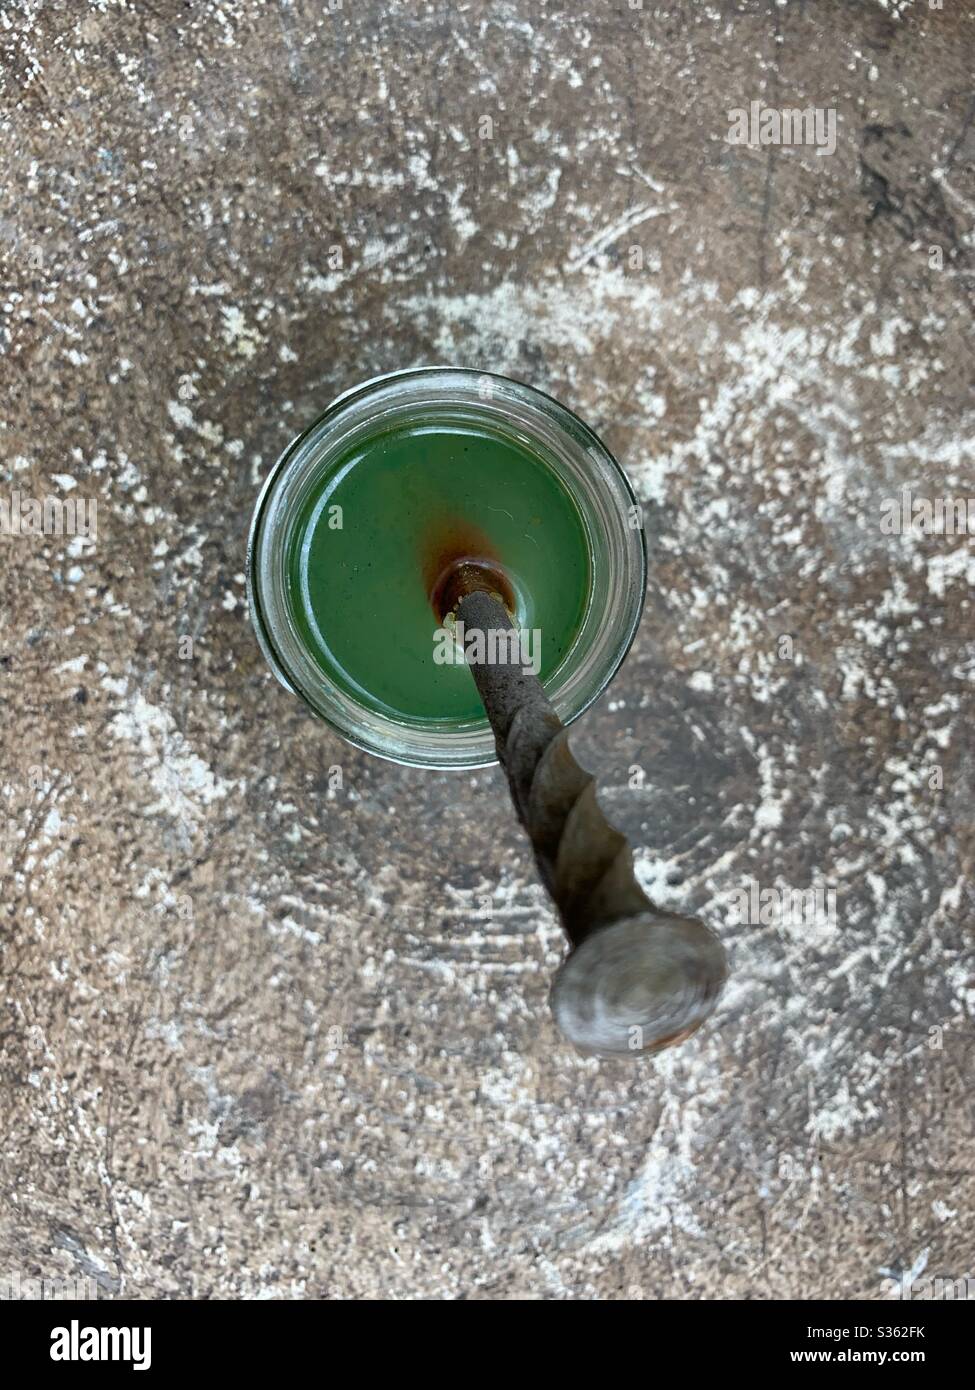 Scientific experiment of placing an iron nail in a solution of copper sulfate. Stock Photo